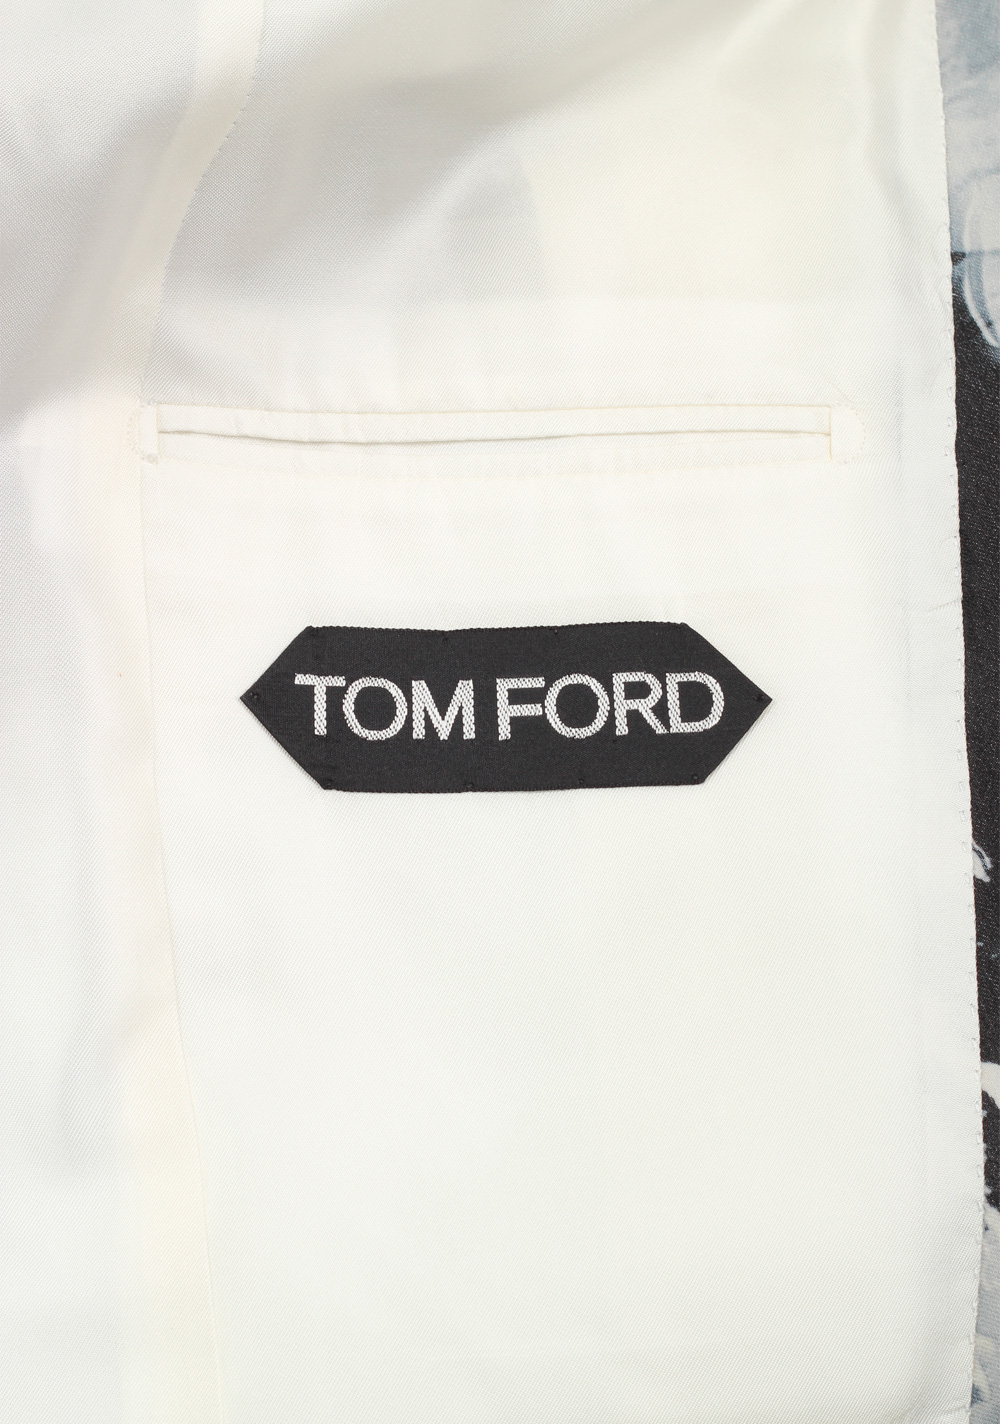 TOM FORD Atticus Painted Swirl Tuxedo Cocktail Dinner Jacket Size 52 / 42R U.S. | Costume Limité